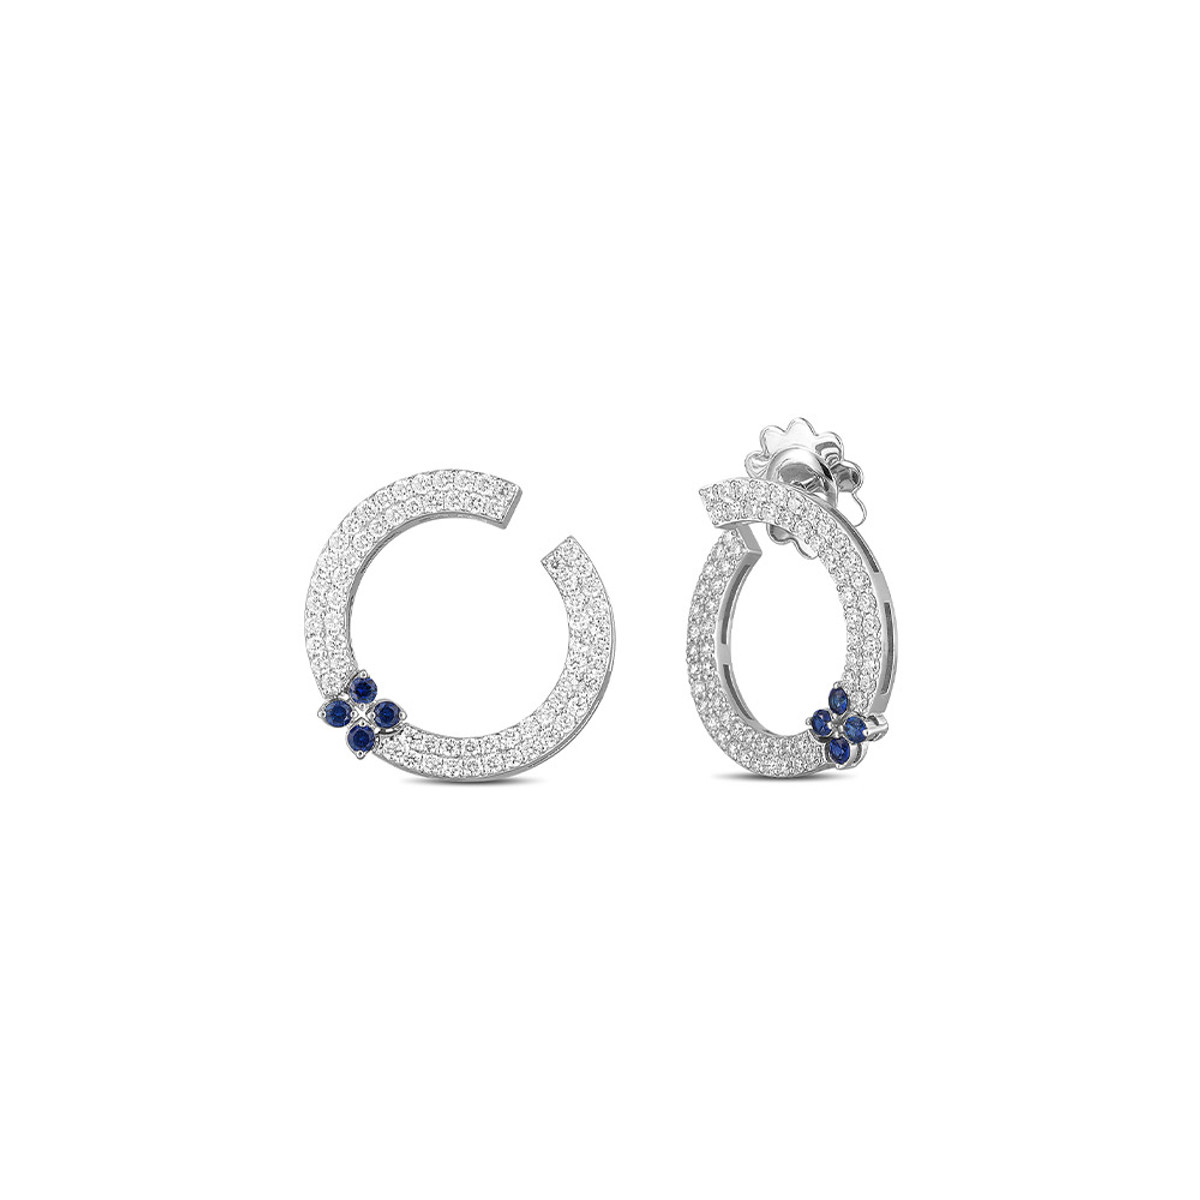 Roberto Coin 18K White Gold Love in Verona Diamond and Blue Sapphire Circle Earrings-57365 Product Image